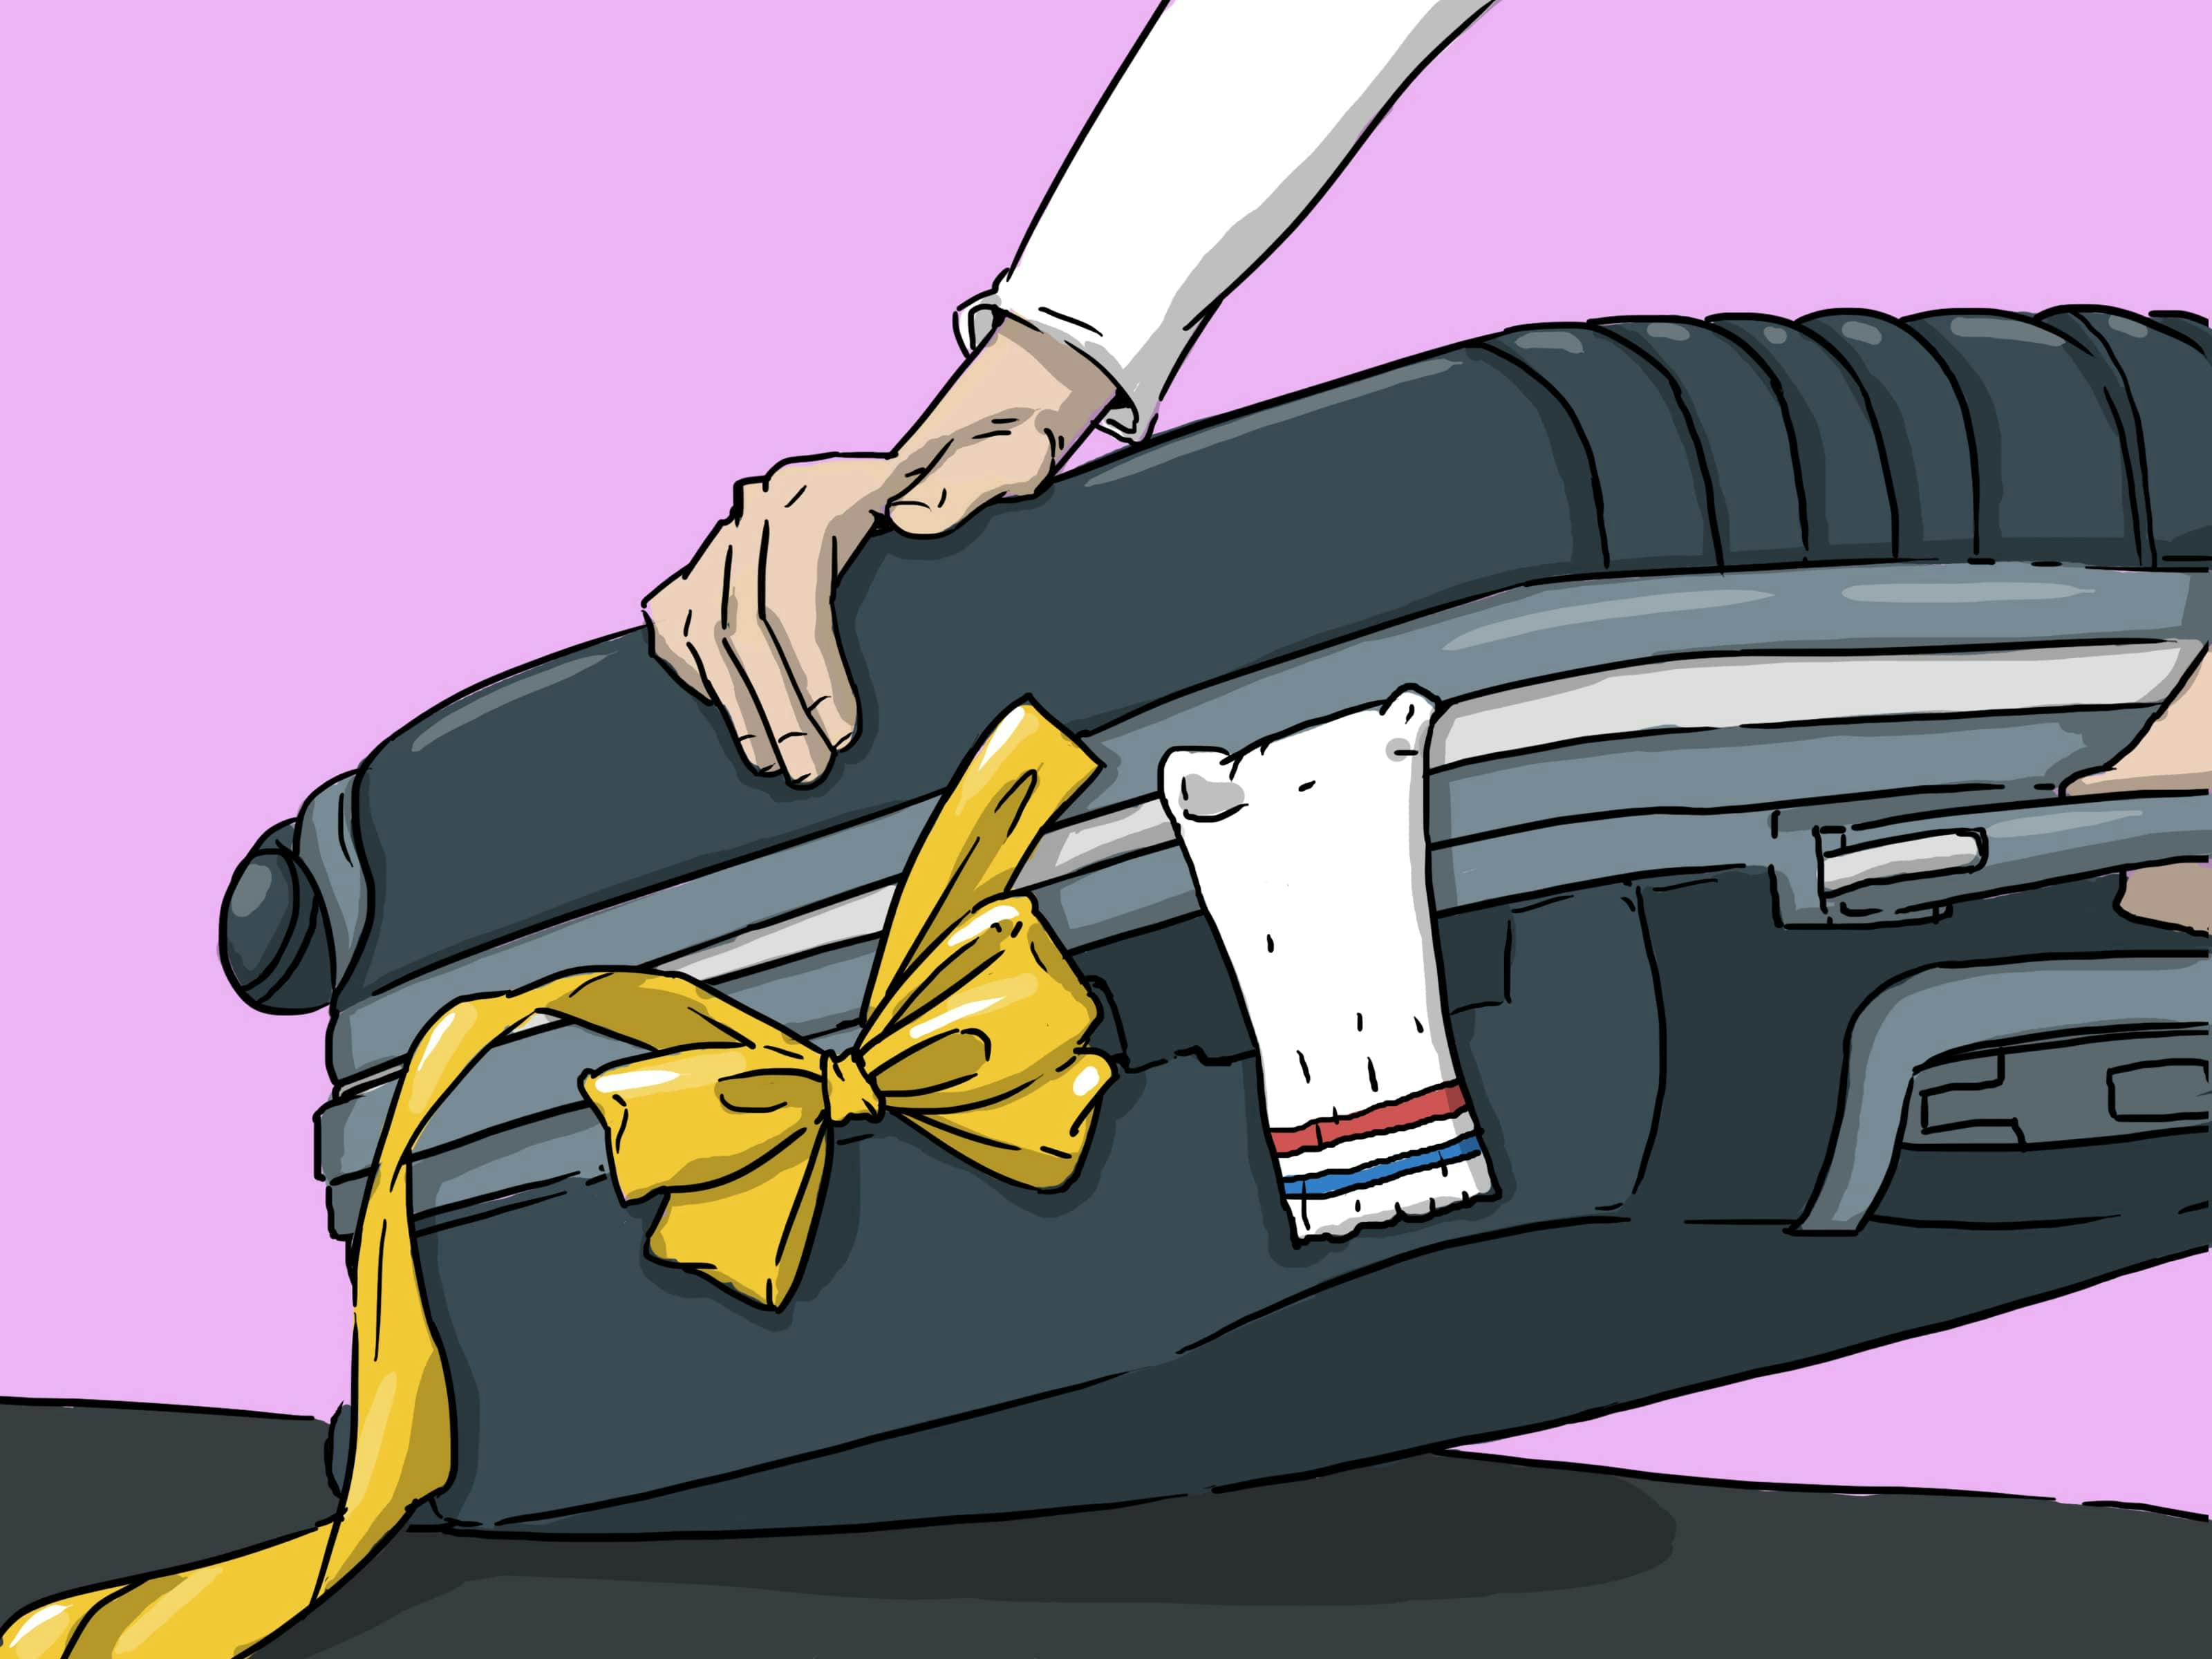 Tie a ribbon or sock to your suitcase to easily spot it on the luggage carousel